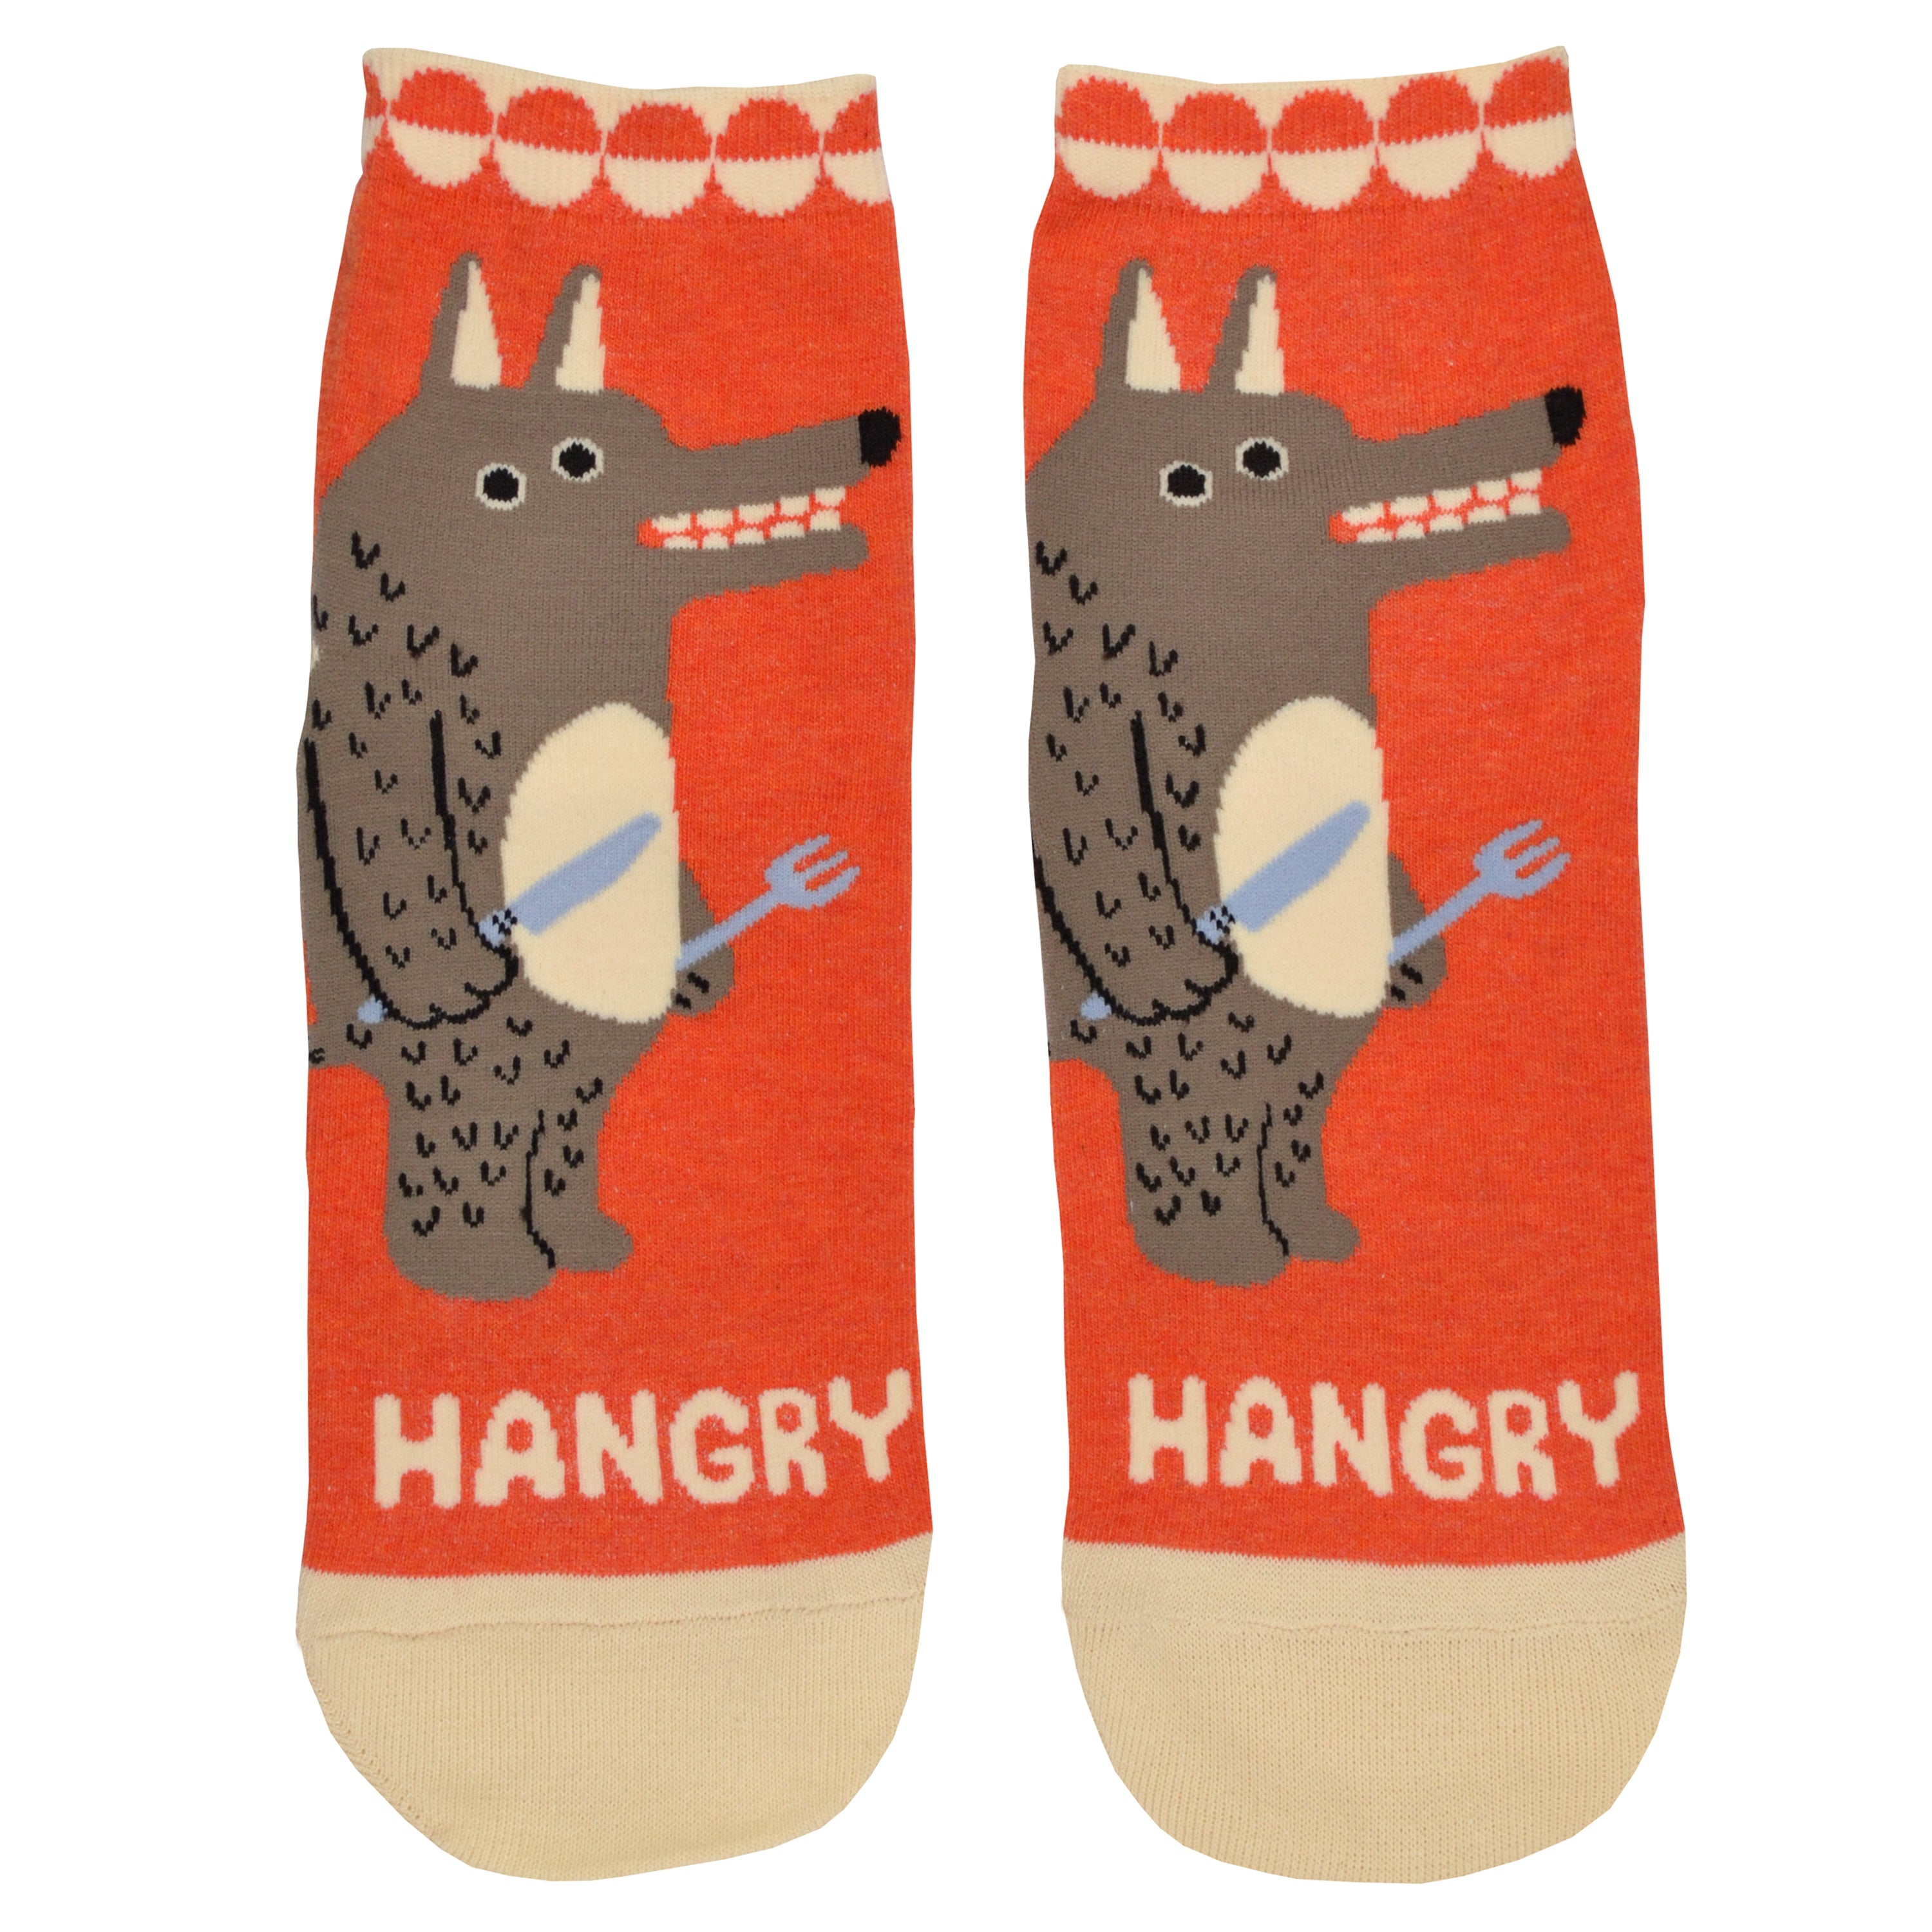 Shown in a flatlay, a pair of women's Blue Q cotton ankle socks in orange with a cream heel, toe, and cuff. The front of the socks features a cartoon wolf man with a knife and fork and the word 